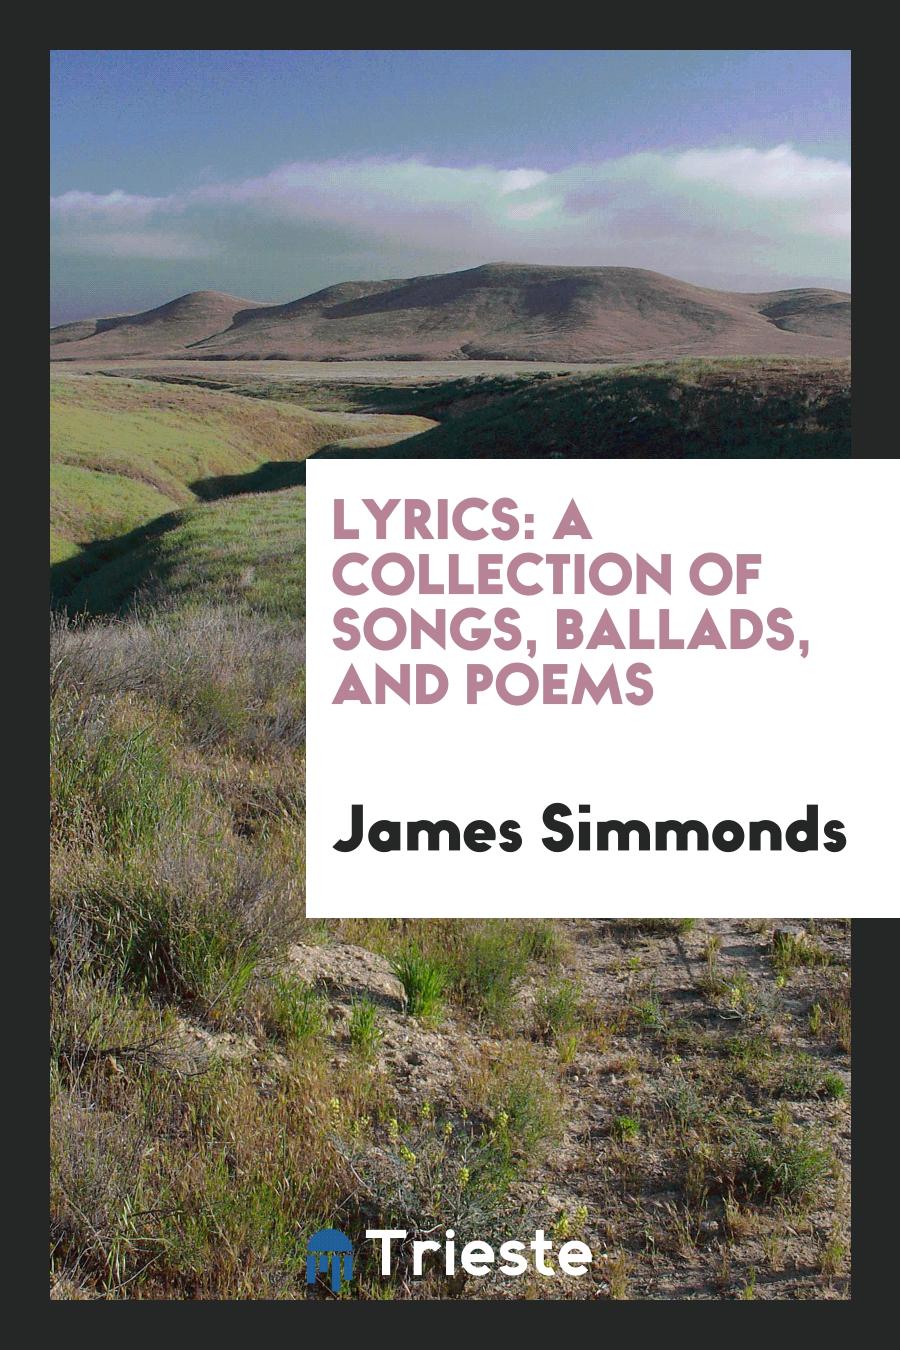 Lyrics: A Collection of Songs, Ballads, and Poems